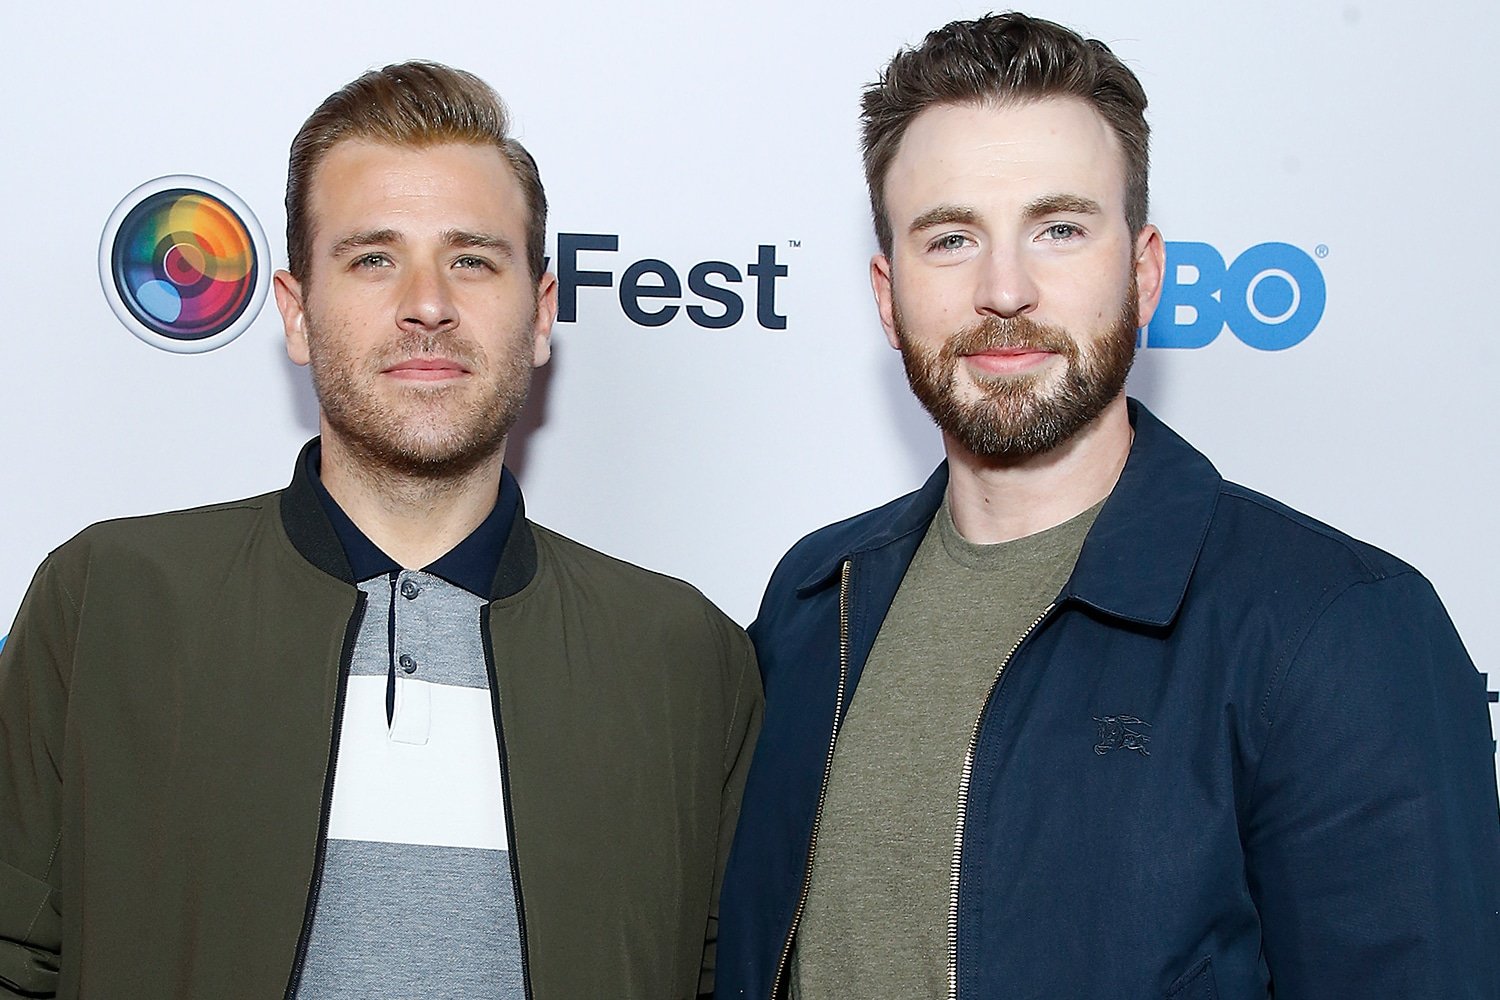 Does Chris Evans have a twin brother?